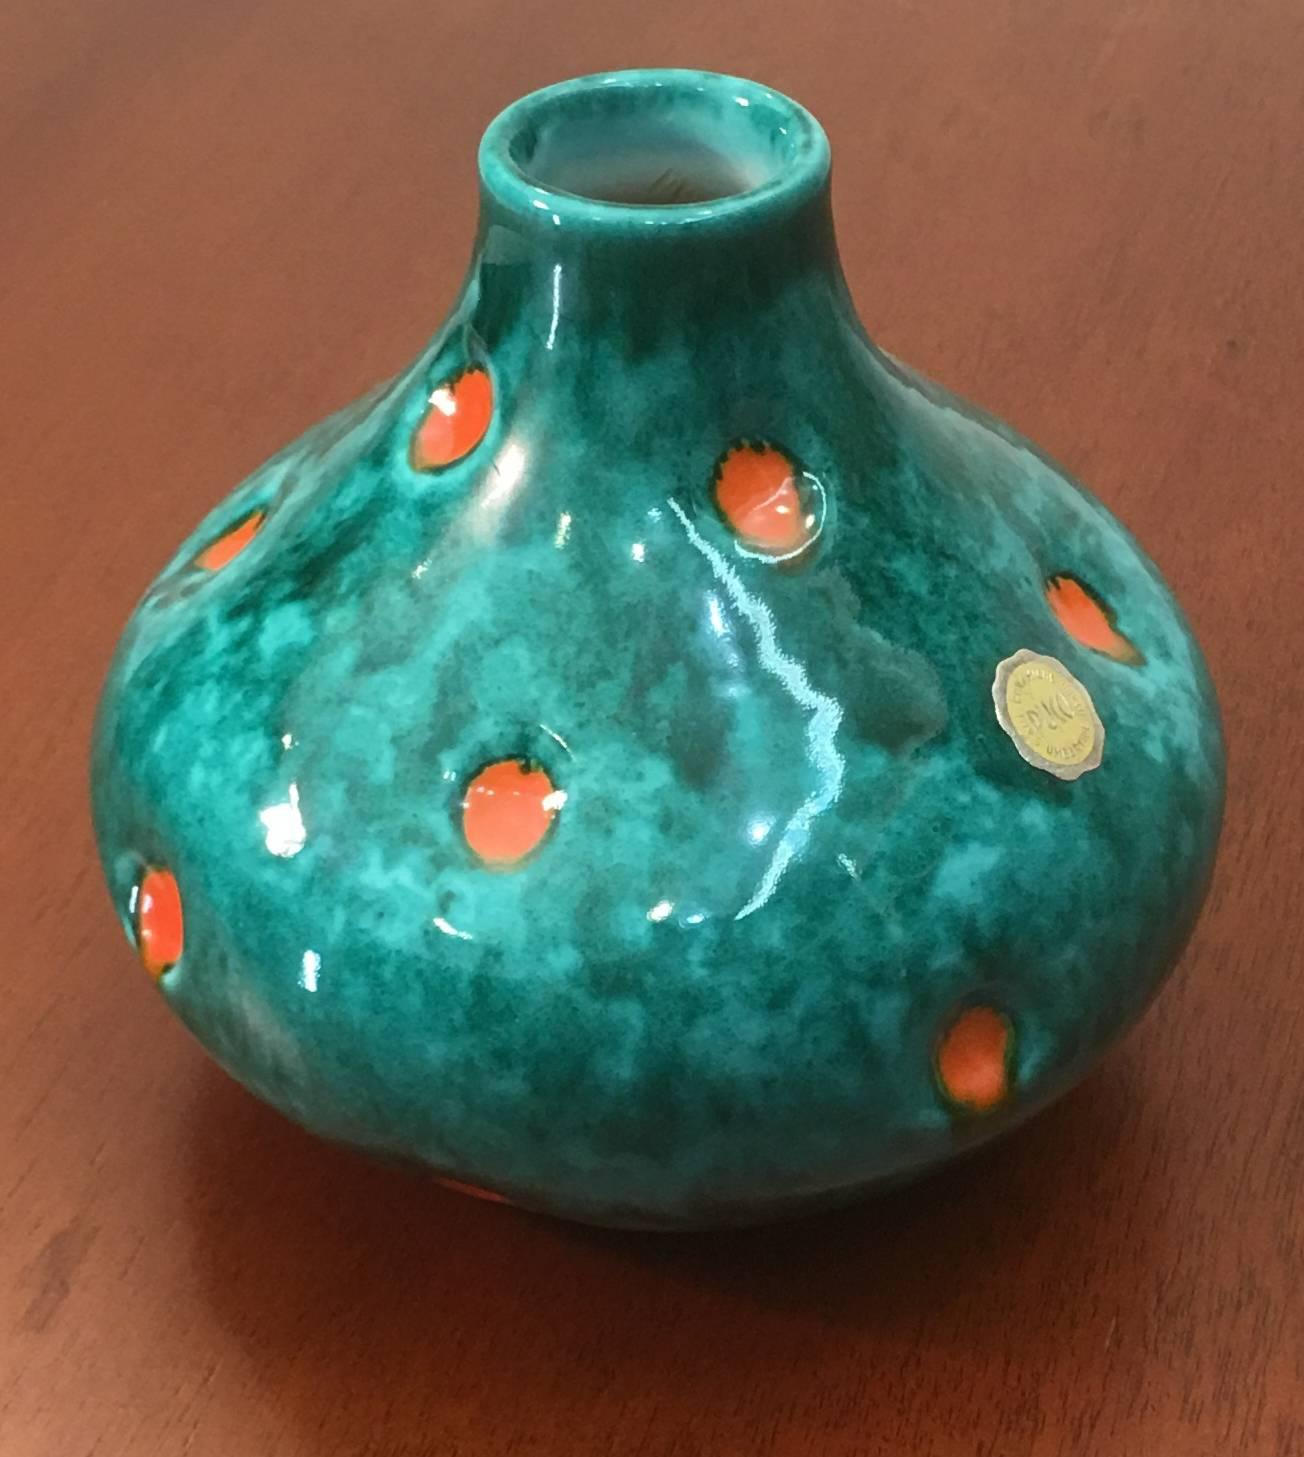 Featuring a polka dot pattern of orange dots over a mixed sea green glaze, this pair of hand-thrown ceramic vases by Pucci affords you the opportunity to own a matched pair from the studio of the company; which is an uncommon offering.

Price is